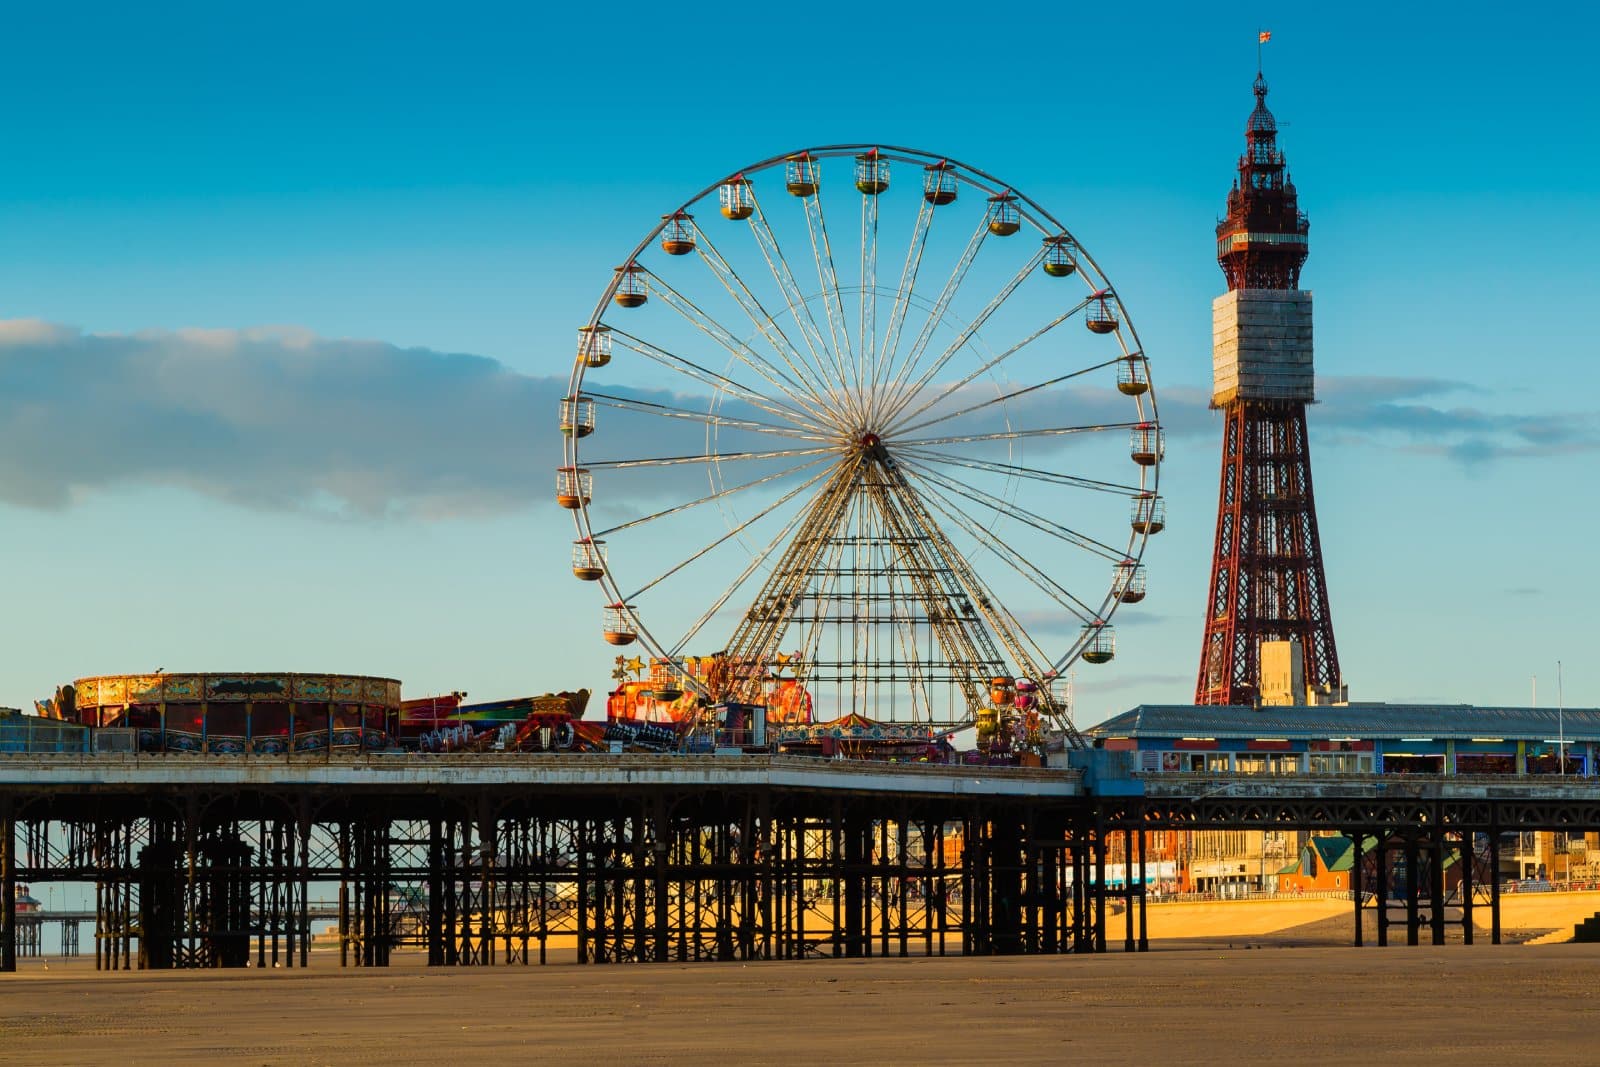 Image Credit: Shutterstock / Paul Daniels <p>Blackpool, still riding the wave of being a 1950s holiday hotspot, hasn’t noticed the calendar flipping. It’s like Las Vegas, if Vegas had stopped at Elvis impersonators.</p>